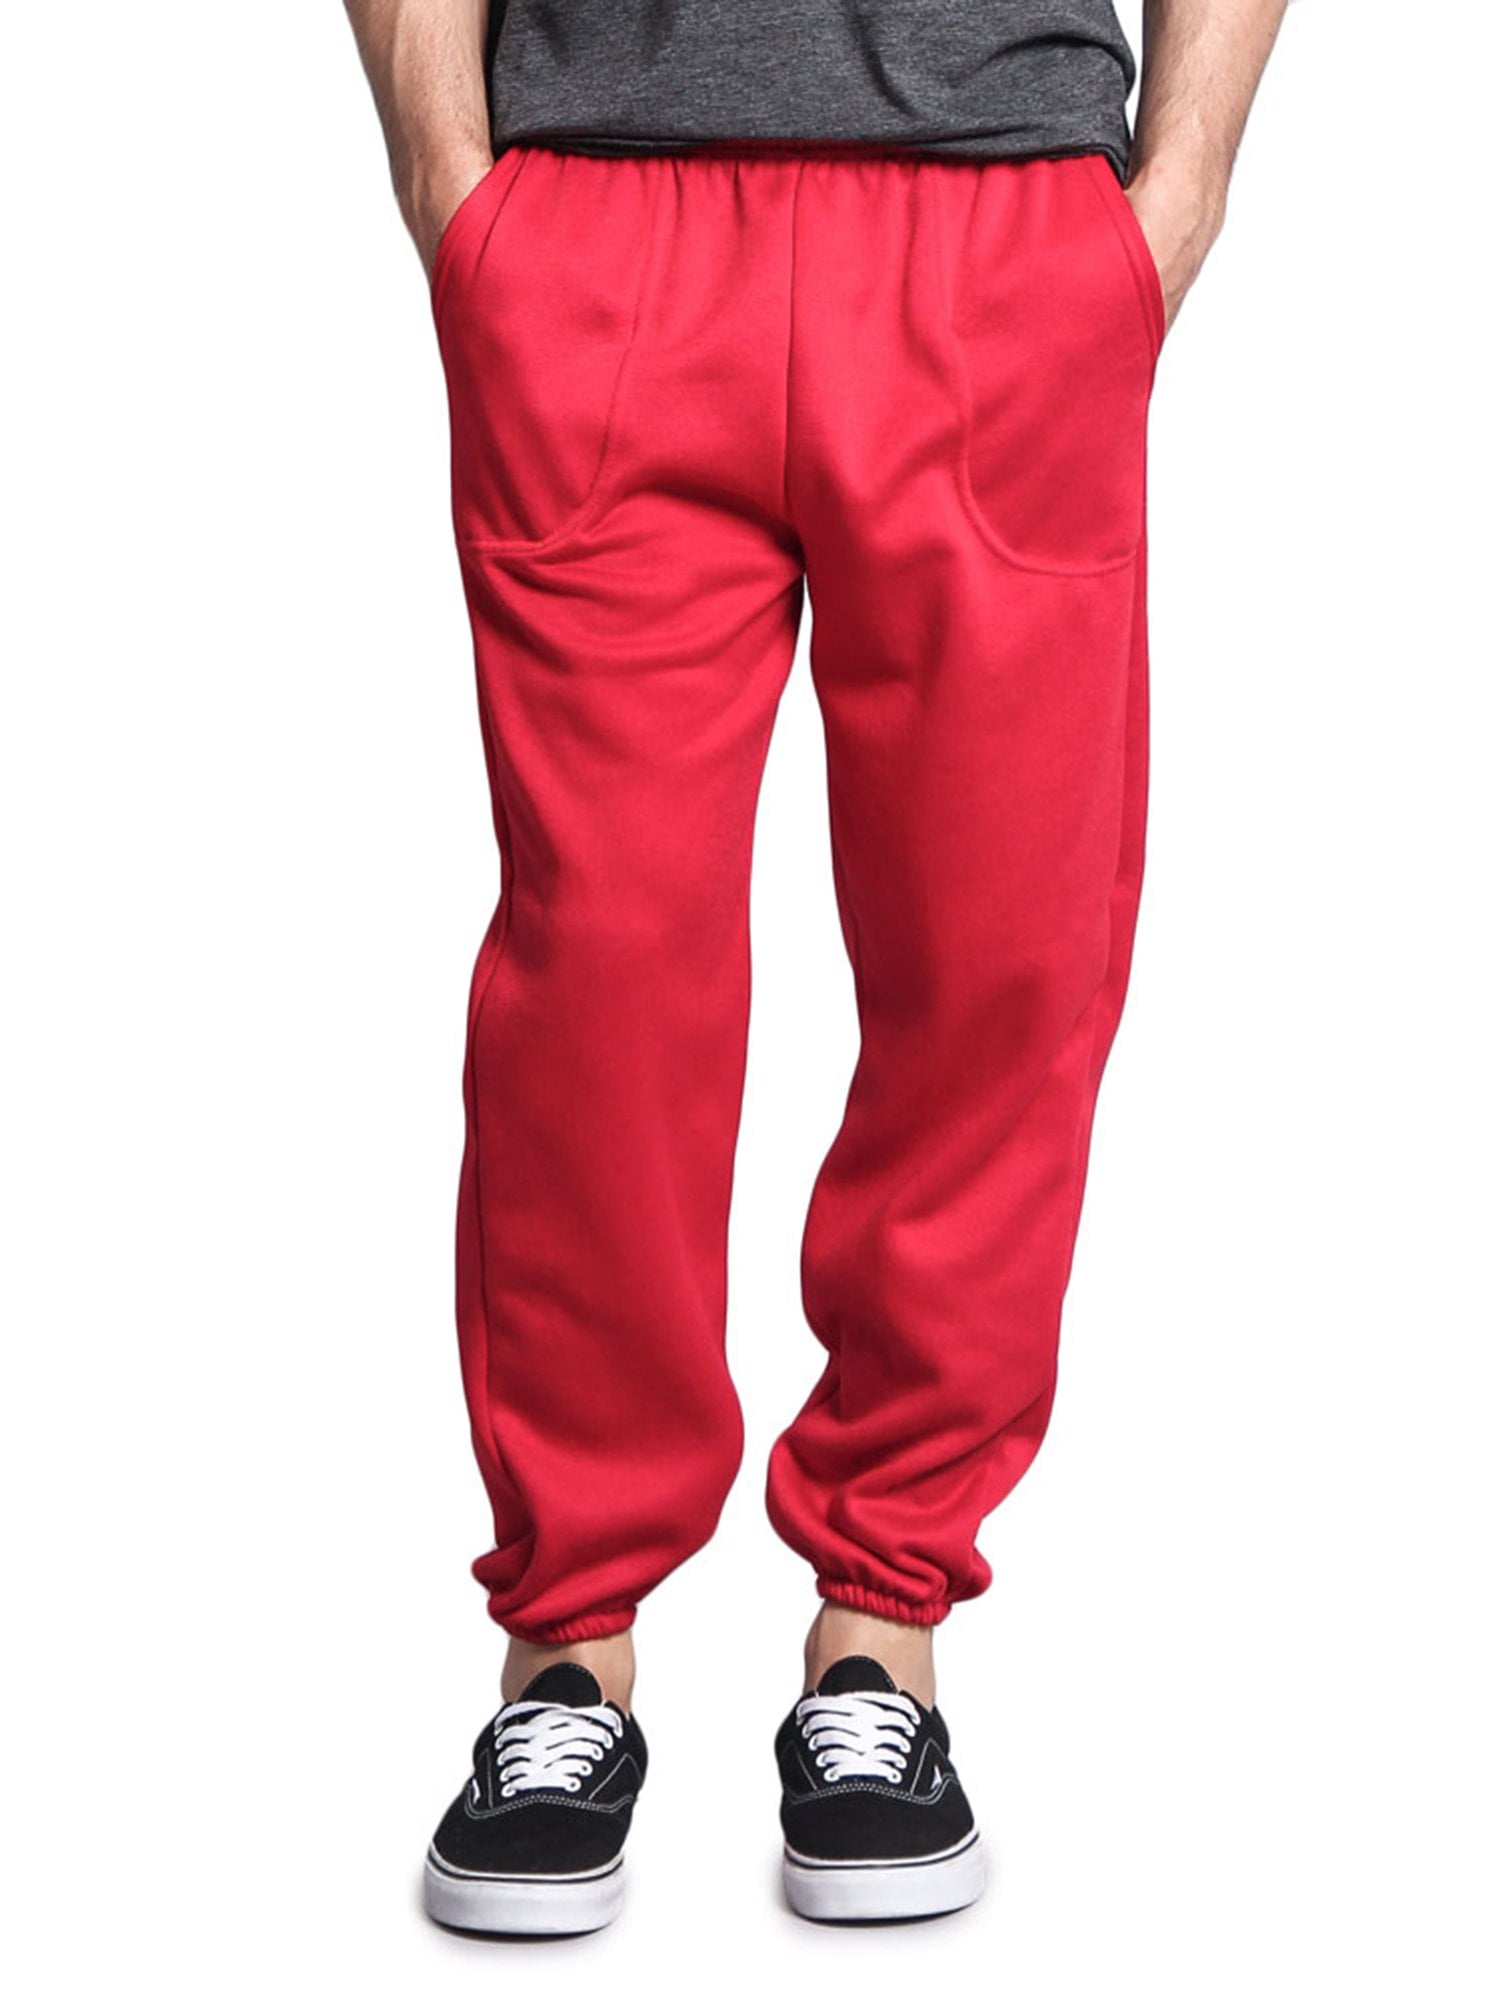 G-Style USA Men's Basic Fleece Jogger Sweatpants with Pockets, Up to 5X ...